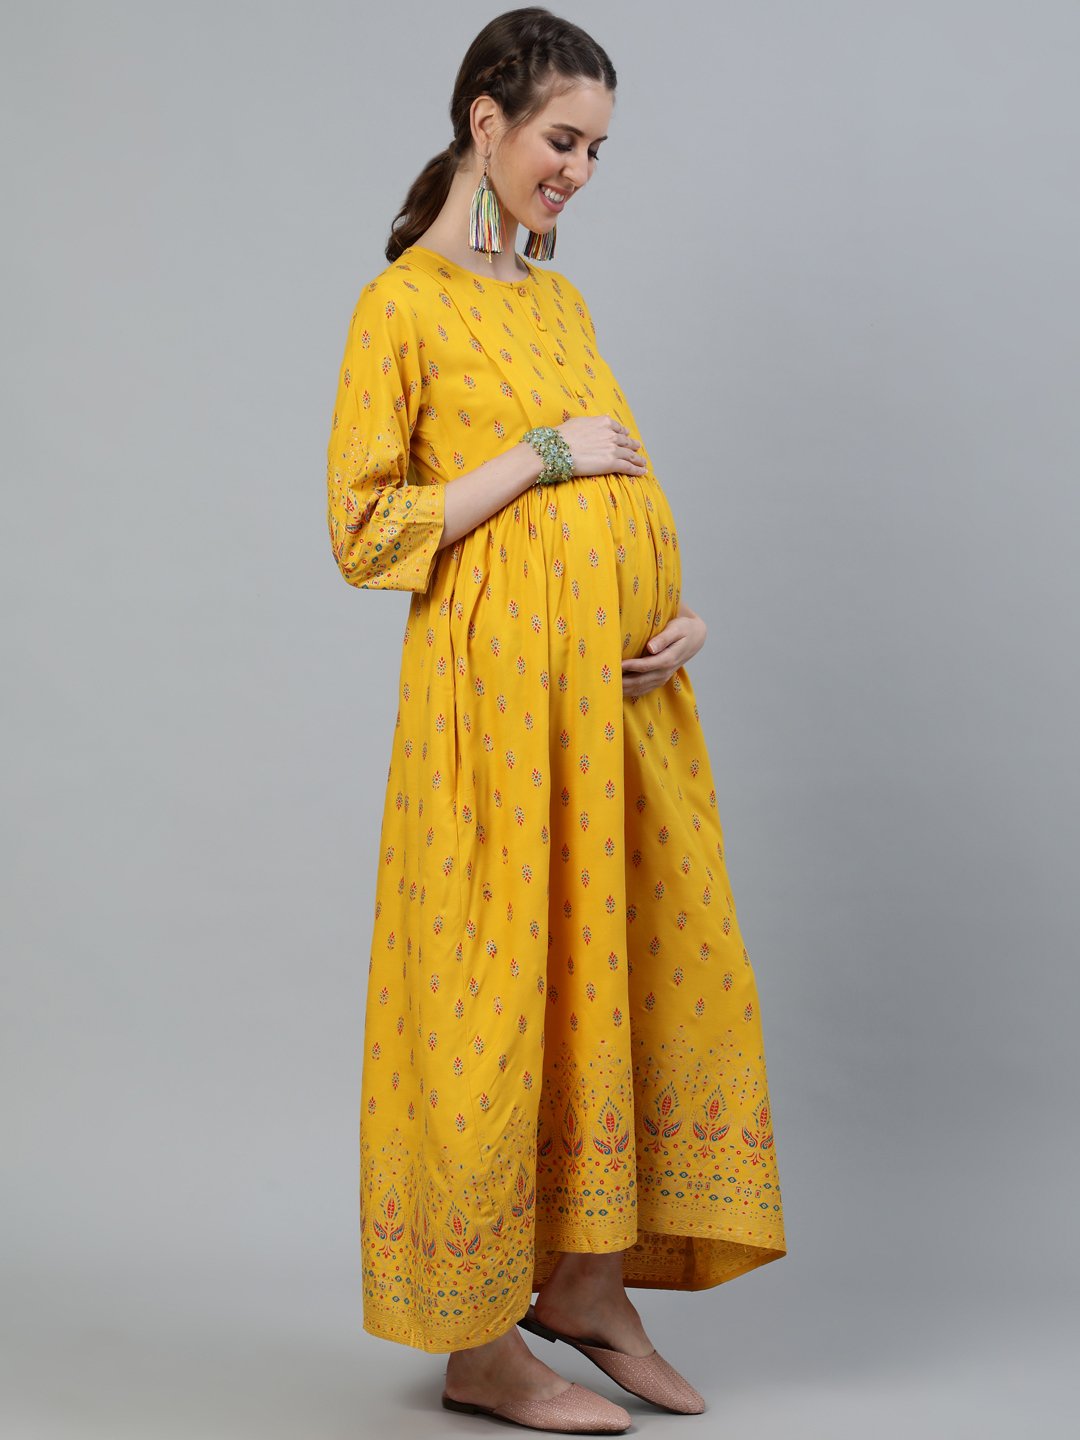 Women's Yellow & Gold Printed Maternity Dress With Three Quarter Sleeves - Nayo Clothing